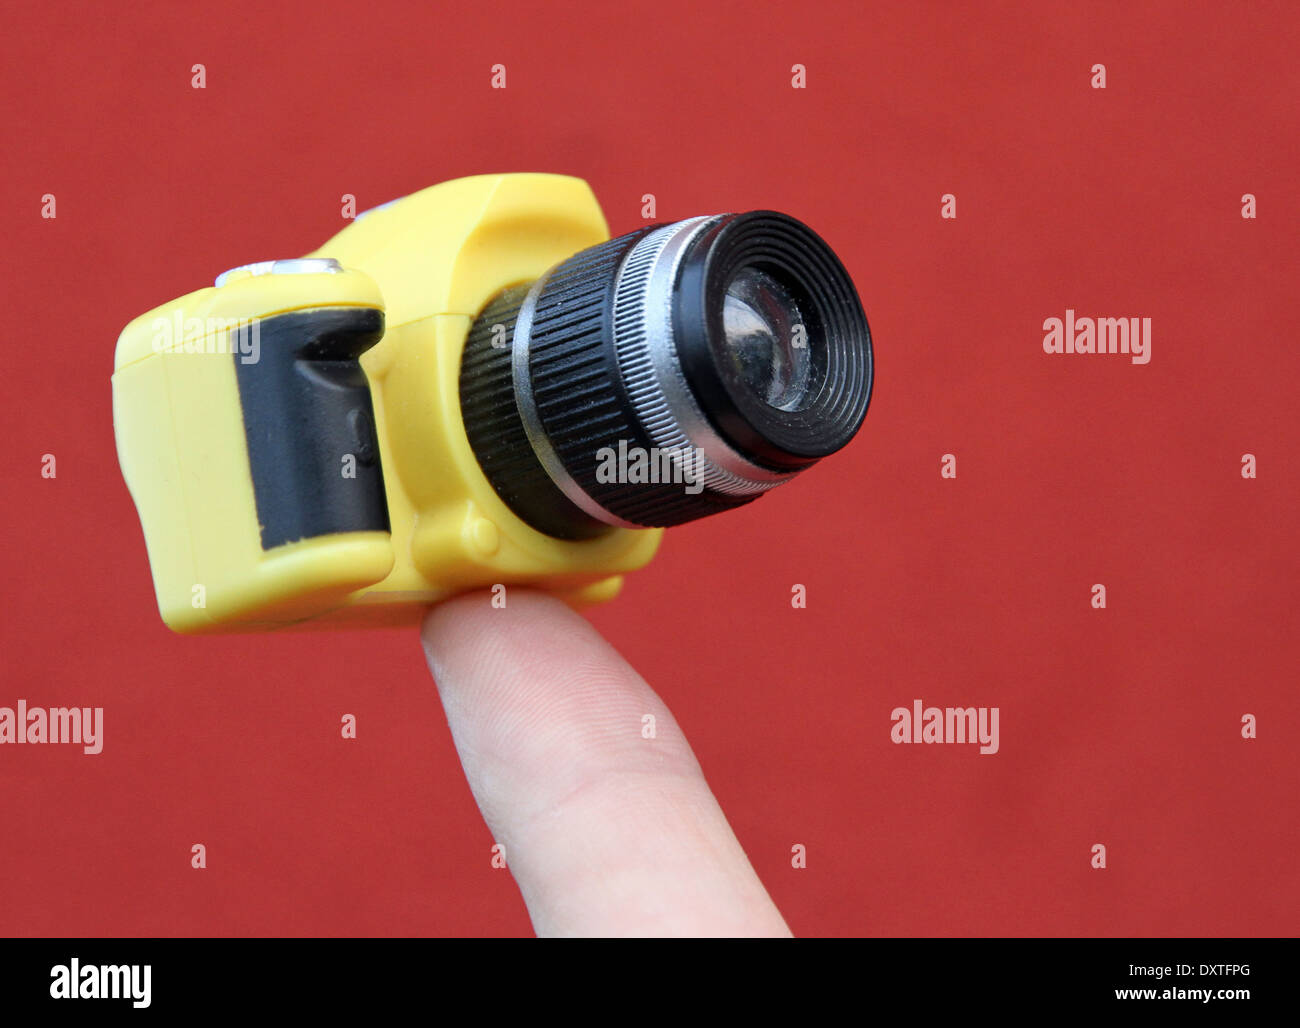 index finger holding a small yellow suspended camera and red background Stock Photo